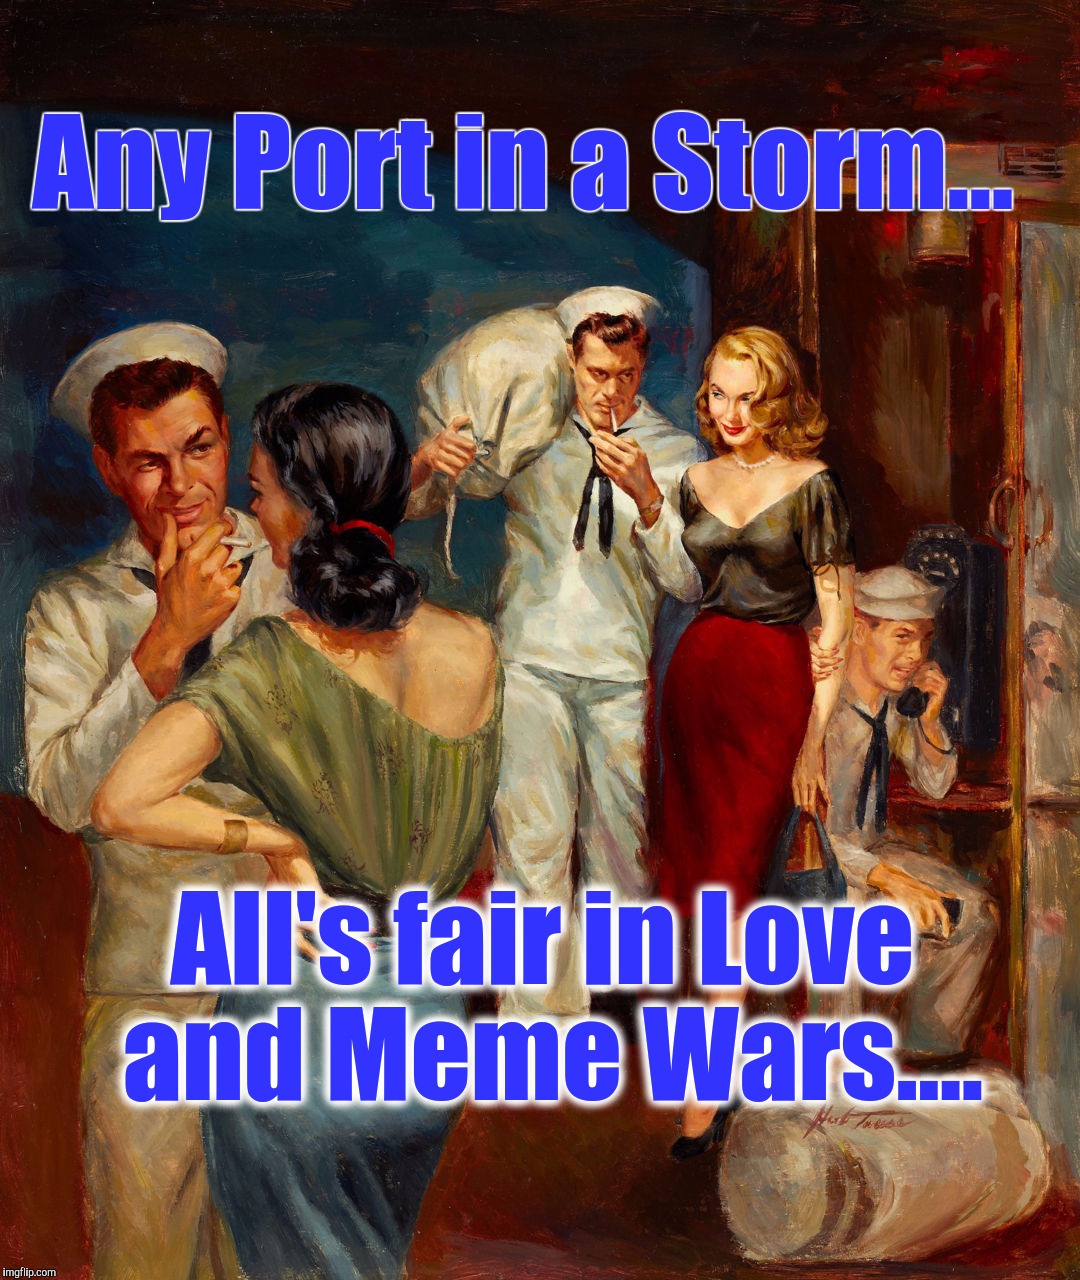 Alt "lifestyles", Adventure - Join the Navy - or send in the Marines. | Any Port in a Storm... All's fair in Love and Meme Wars.... | image tagged in pulp art week,alt accounts,memes,the most interesting man in yhe jungle | made w/ Imgflip meme maker